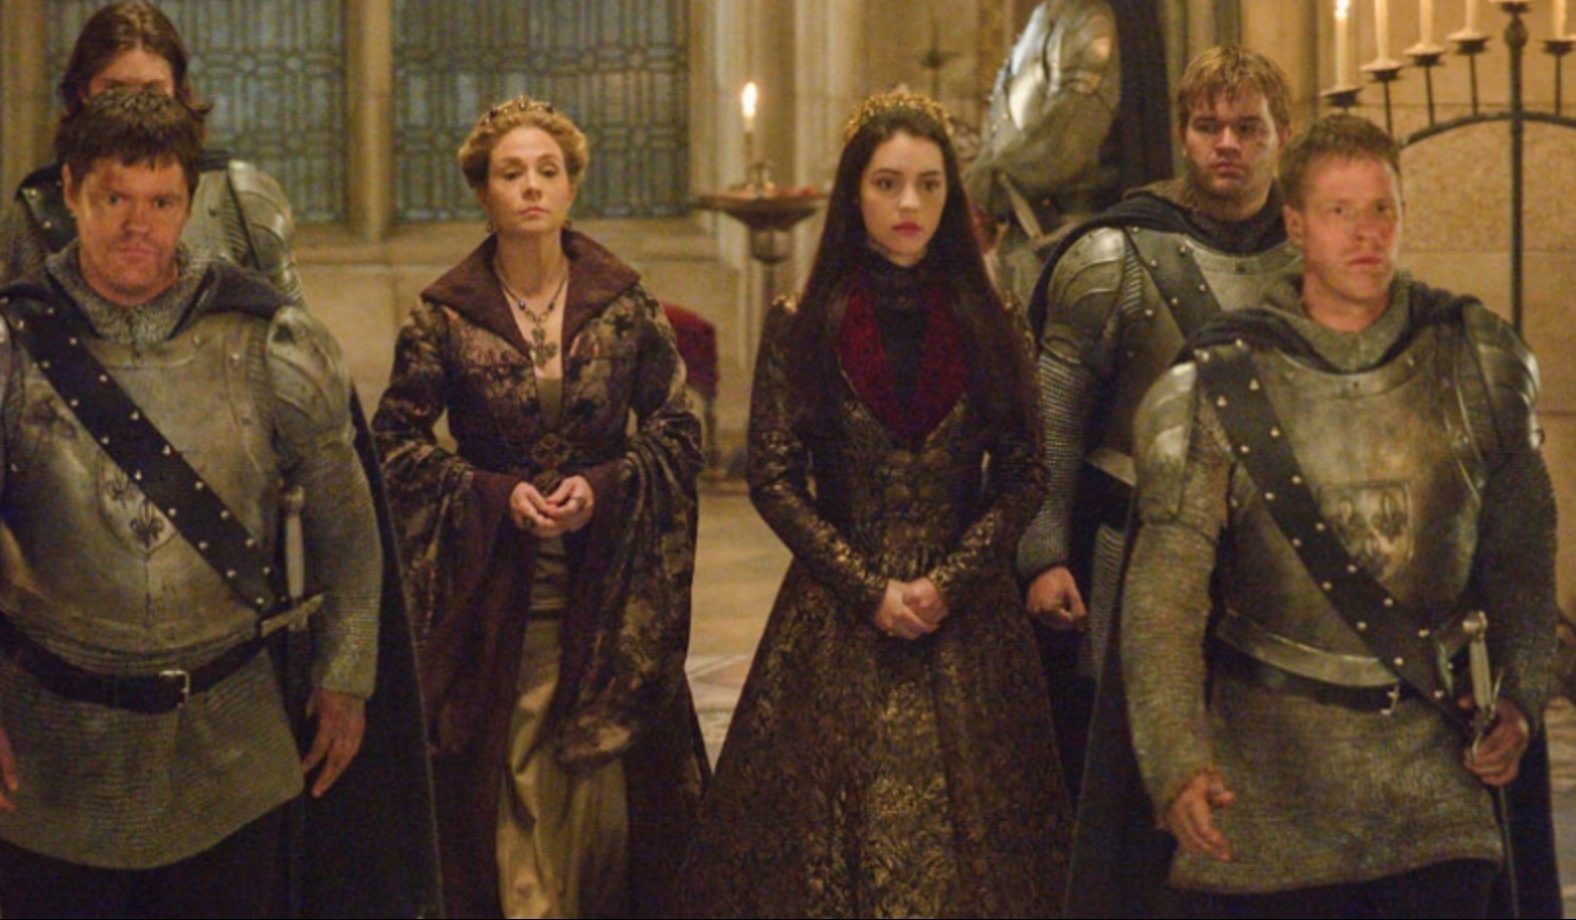 Catherine and Mary in Reign S2E09